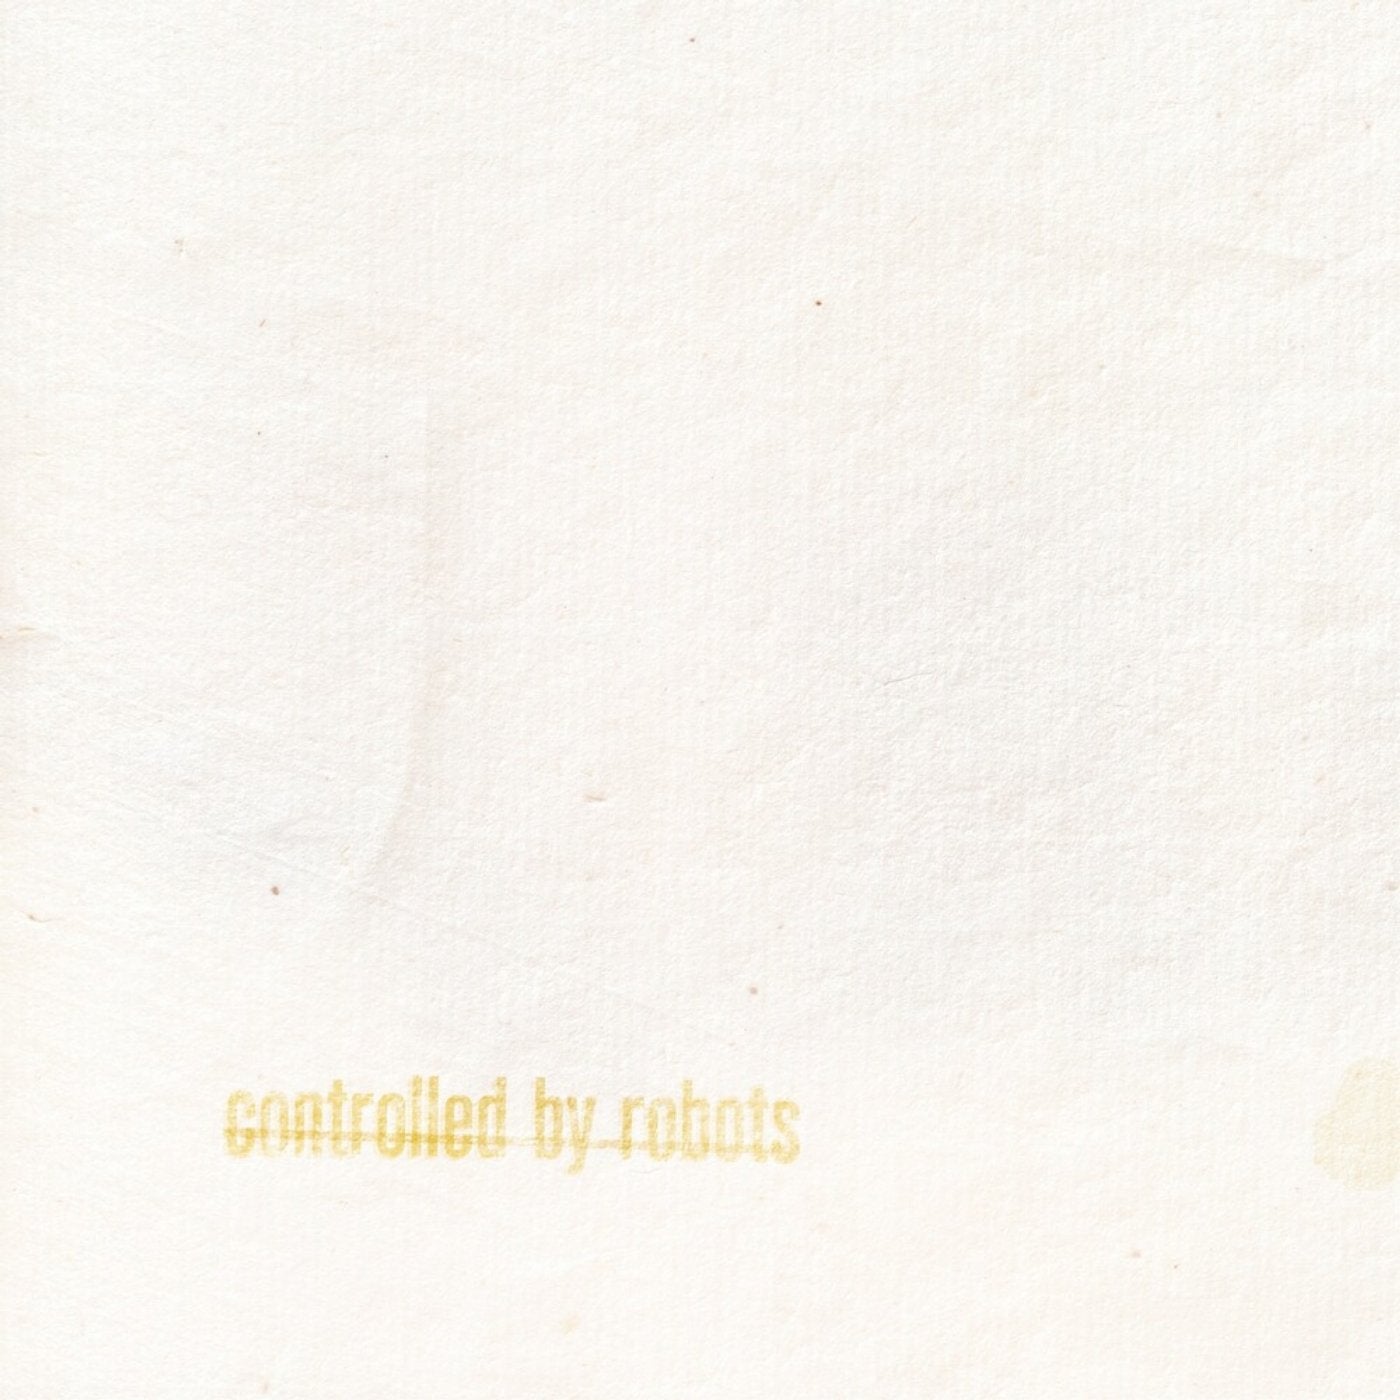 Controlled by Robots